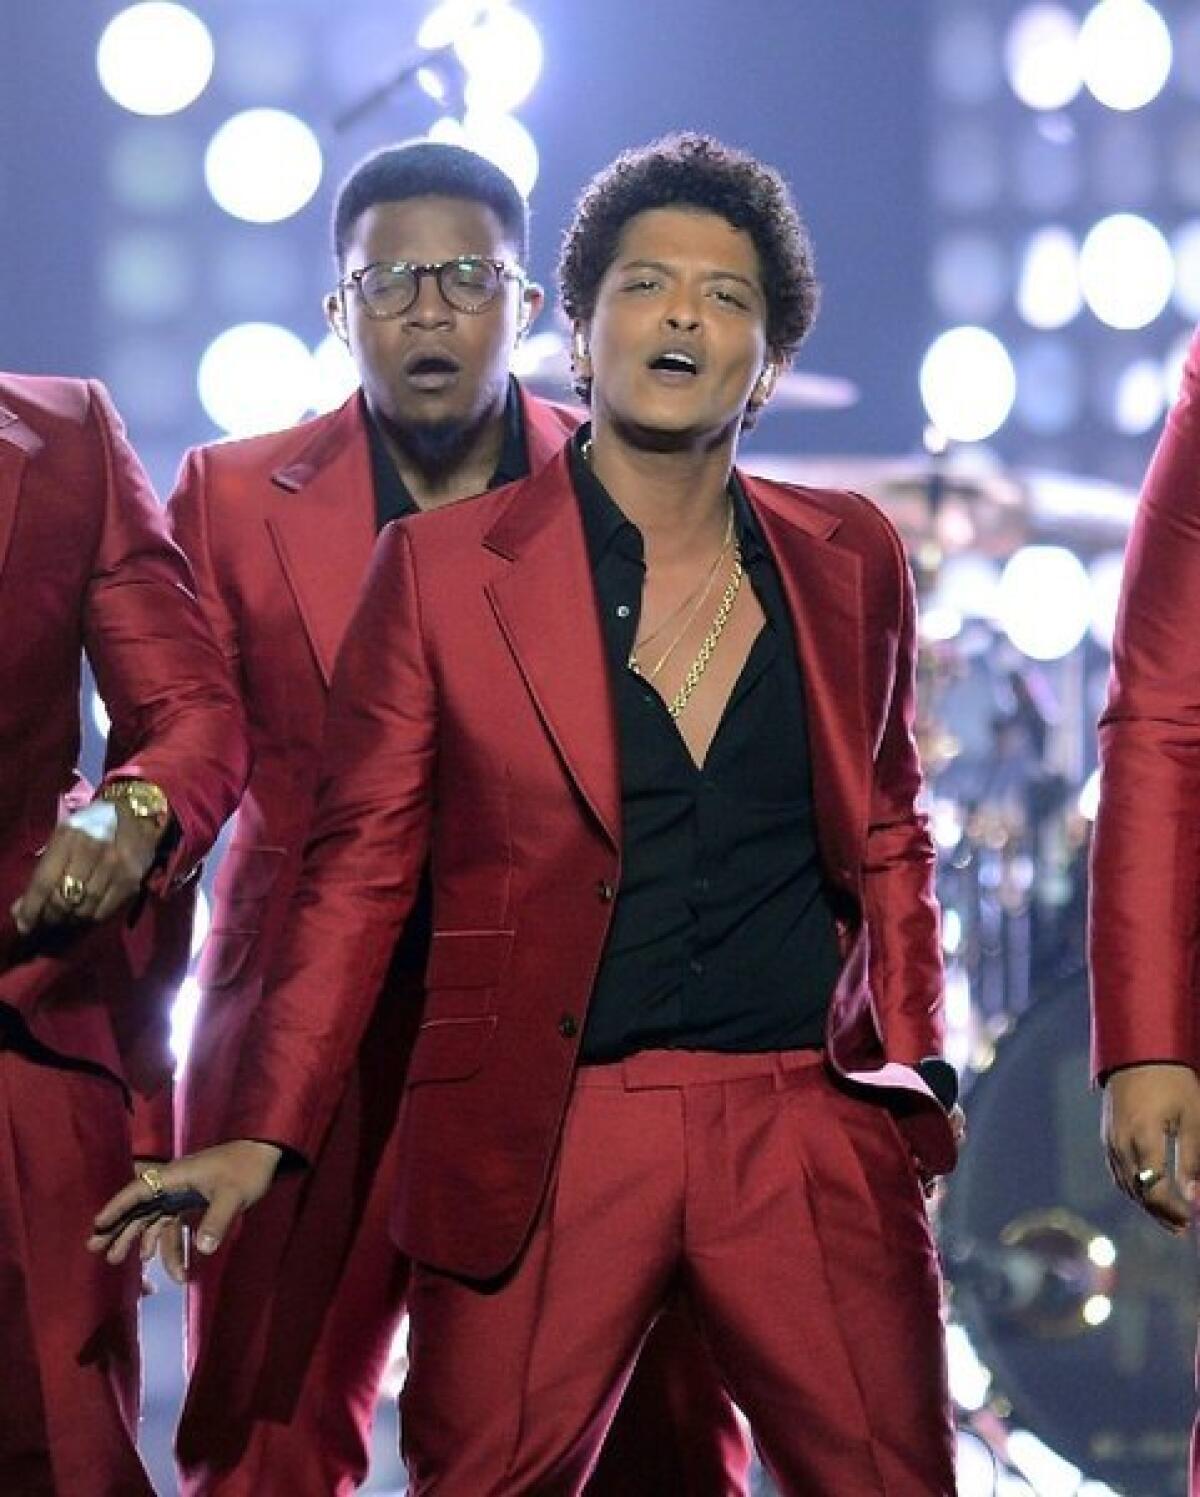 Bruno Mars performs onstage during the 2013 Billboard Music Awards. Italian luxury brand Dolce & Gabbana has announced it is outfitting him for his world tour, which kicks off this weekend in Washington, D.C.